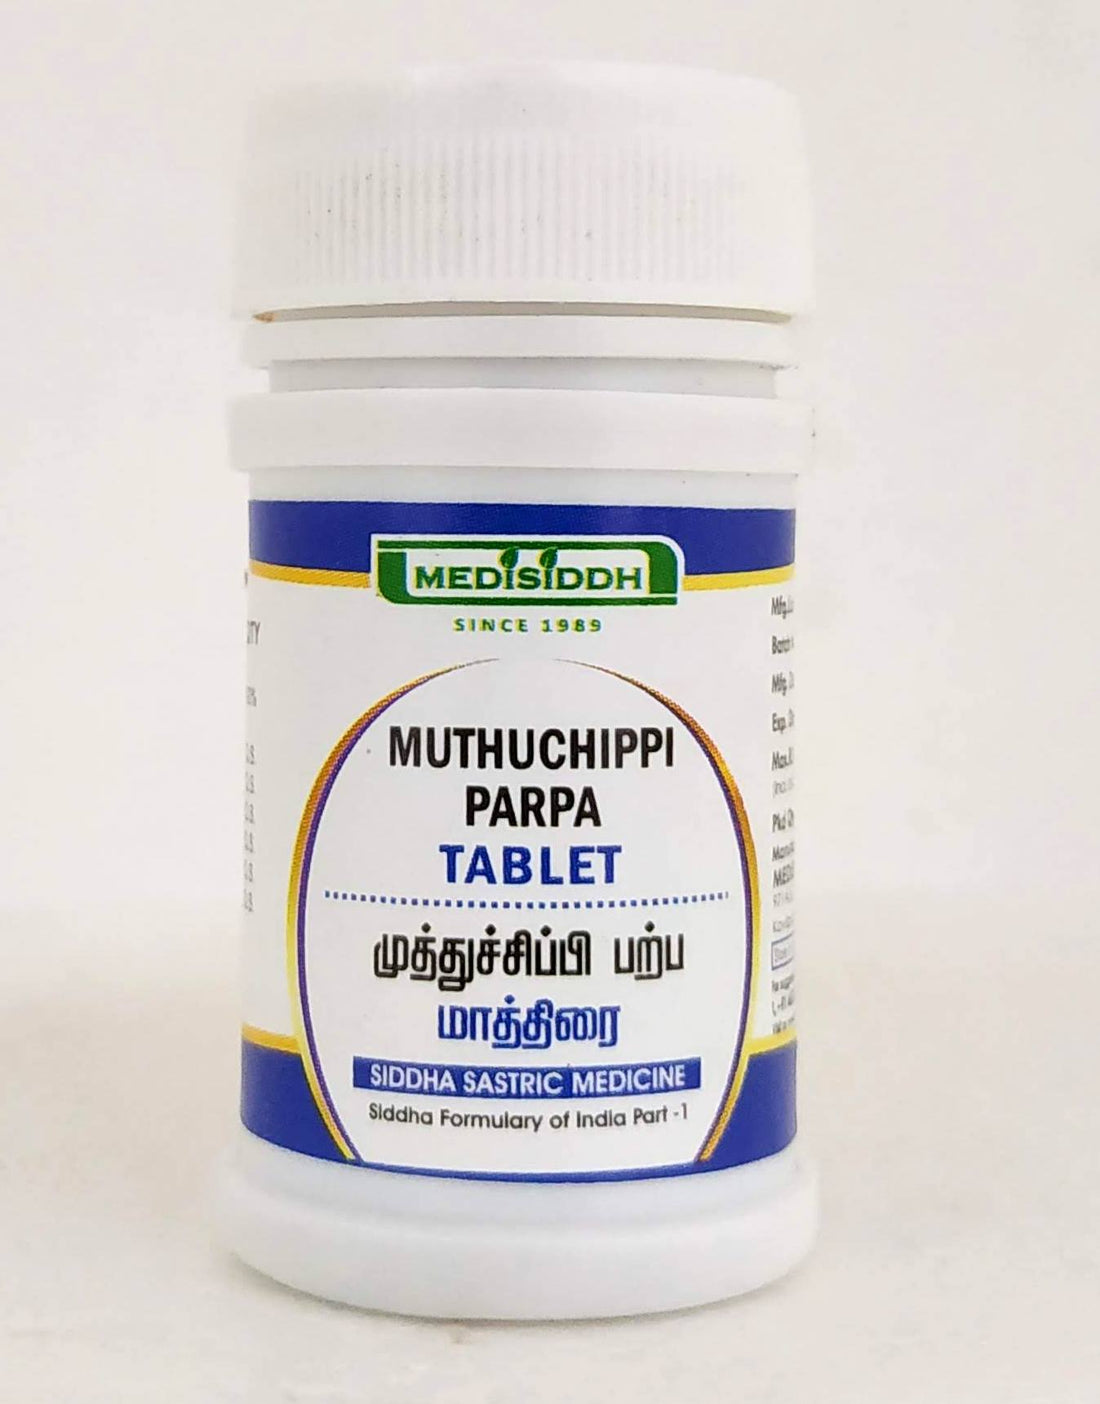 Shop Muthichippi Parpam Tablet - 100Tablets at price 55.00 from Medisiddh Online - Ayush Care